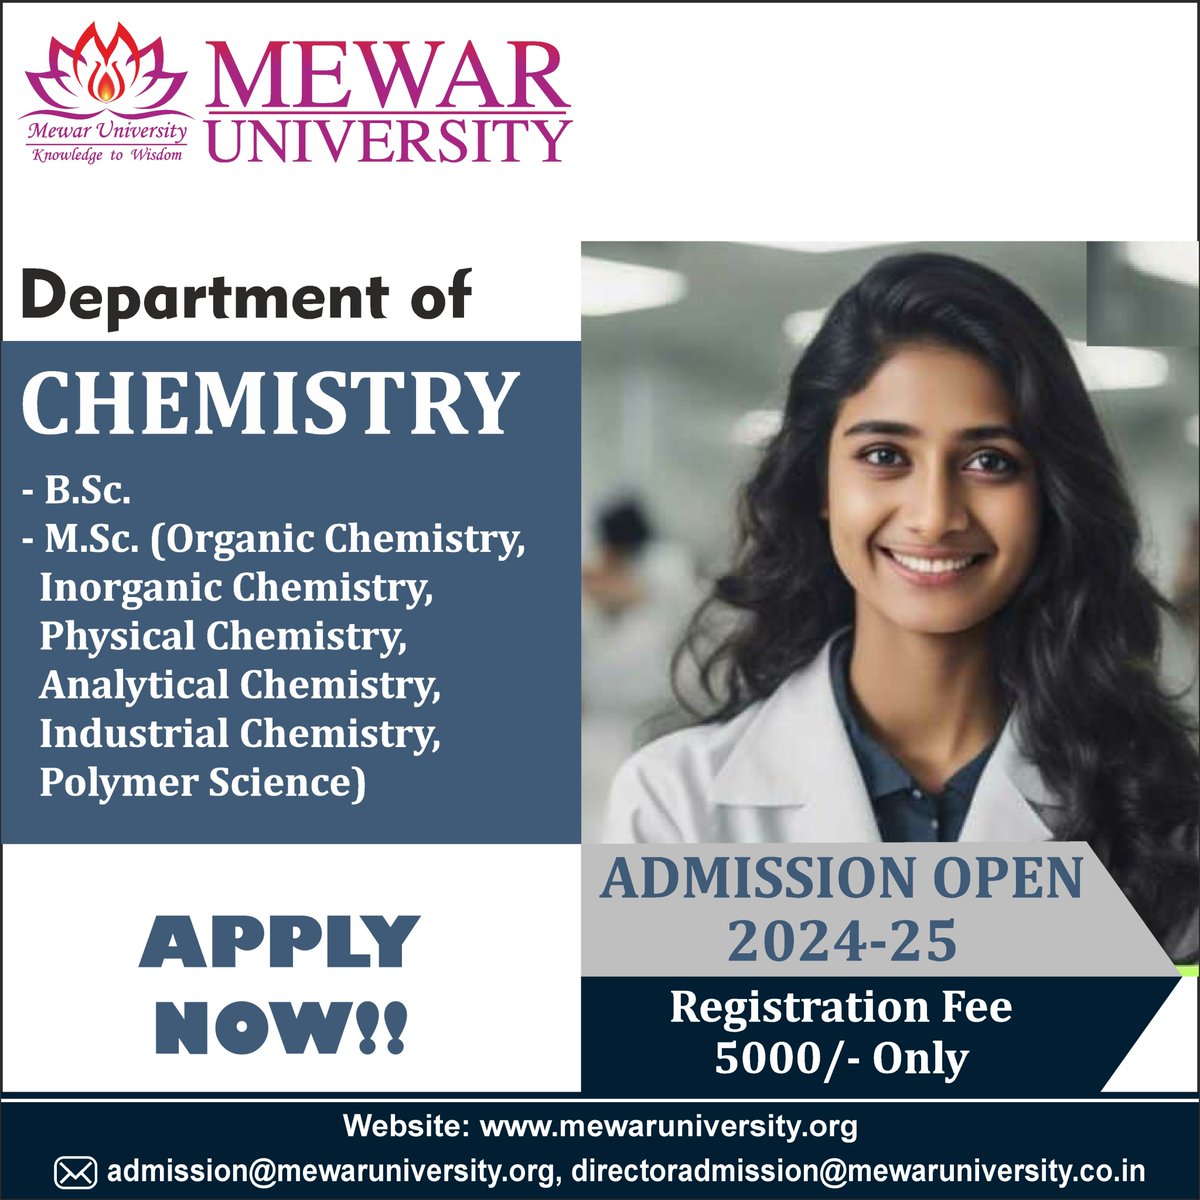 Admissions Open 2024-25 for Faculty of Science & Technology at #MewarUniversity, Chittorgarh (Rajasthan)!

Programs:-
👉 B.Sc.
👉 M.Sc.

🔗 mewaruniversity.org

#AdmissionsOpen2024 #CUET2024 #Chemistry #TopUniversityInRajasthan #Education